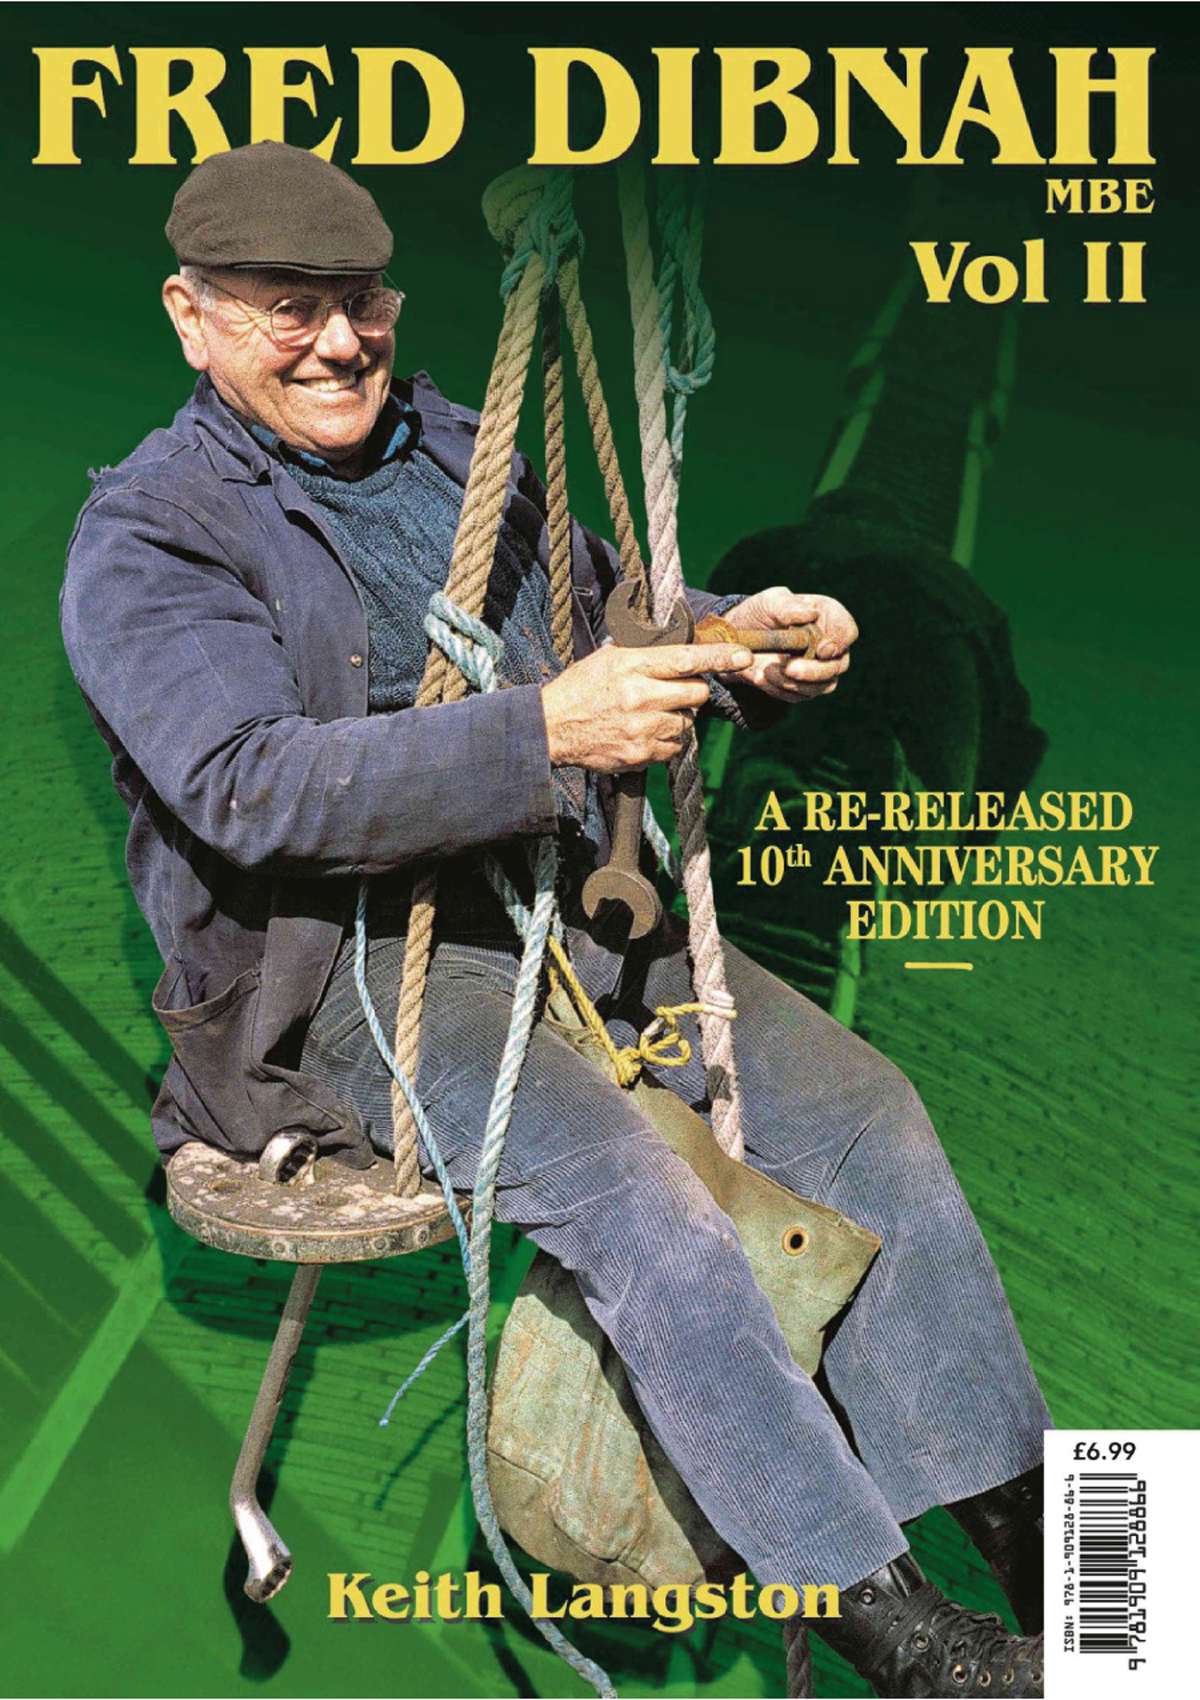 Fred Dibnah MBE: Volume 2 by Keith Langston (Bookazine)